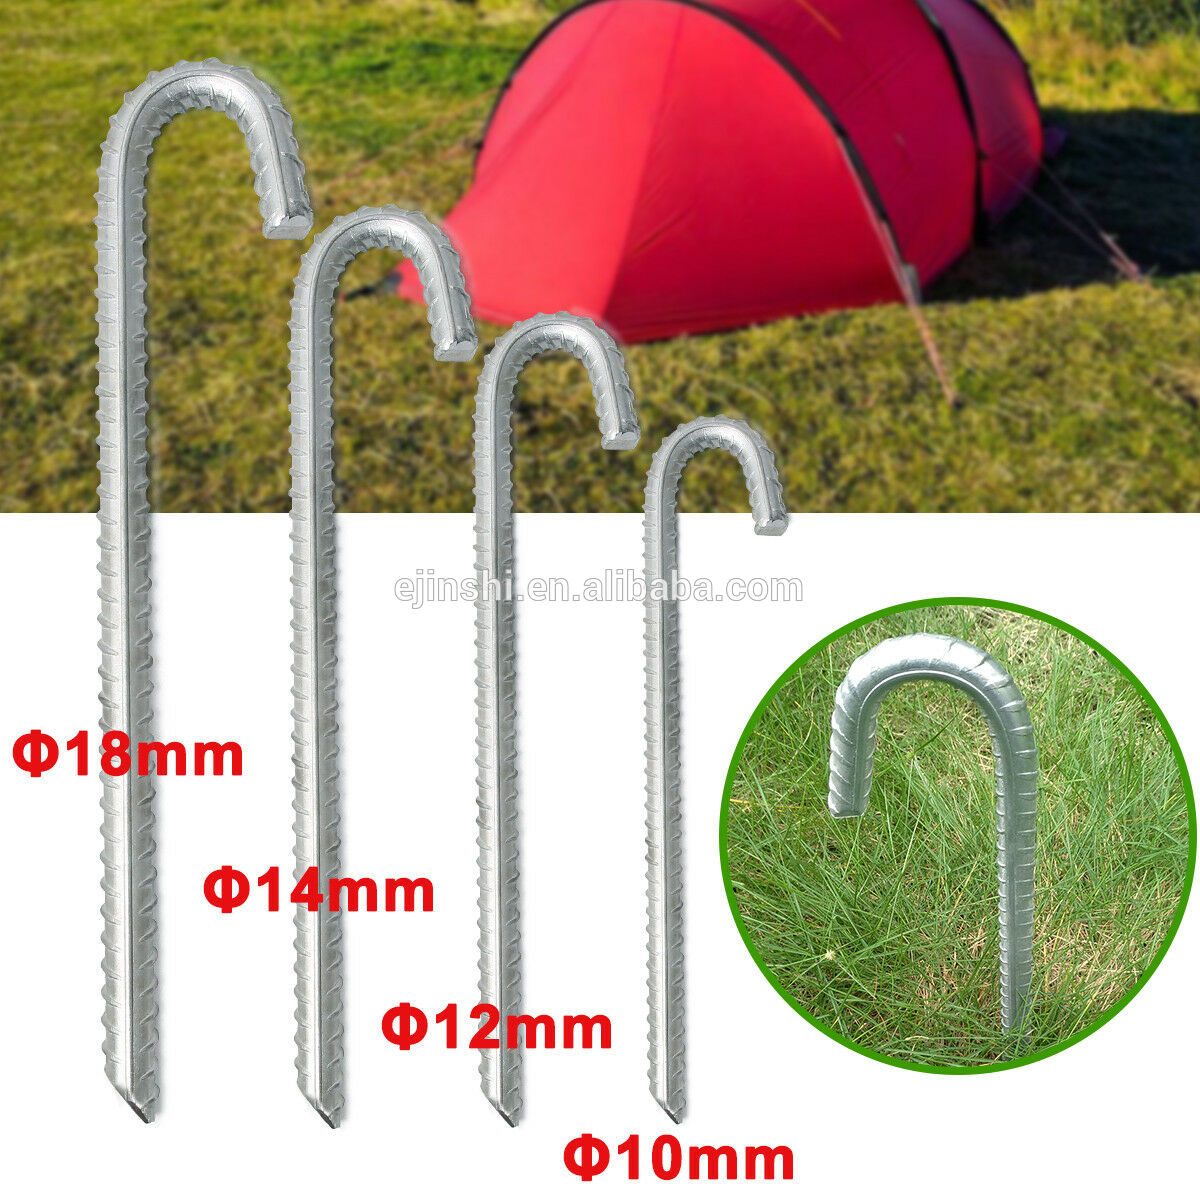 8 Pack 16 Galvanized Rebar Stakes Heavy Duty J Hook Ground Anchors, Curved  Steel Tent Stakes Anti Rust Steel Ground Stakes